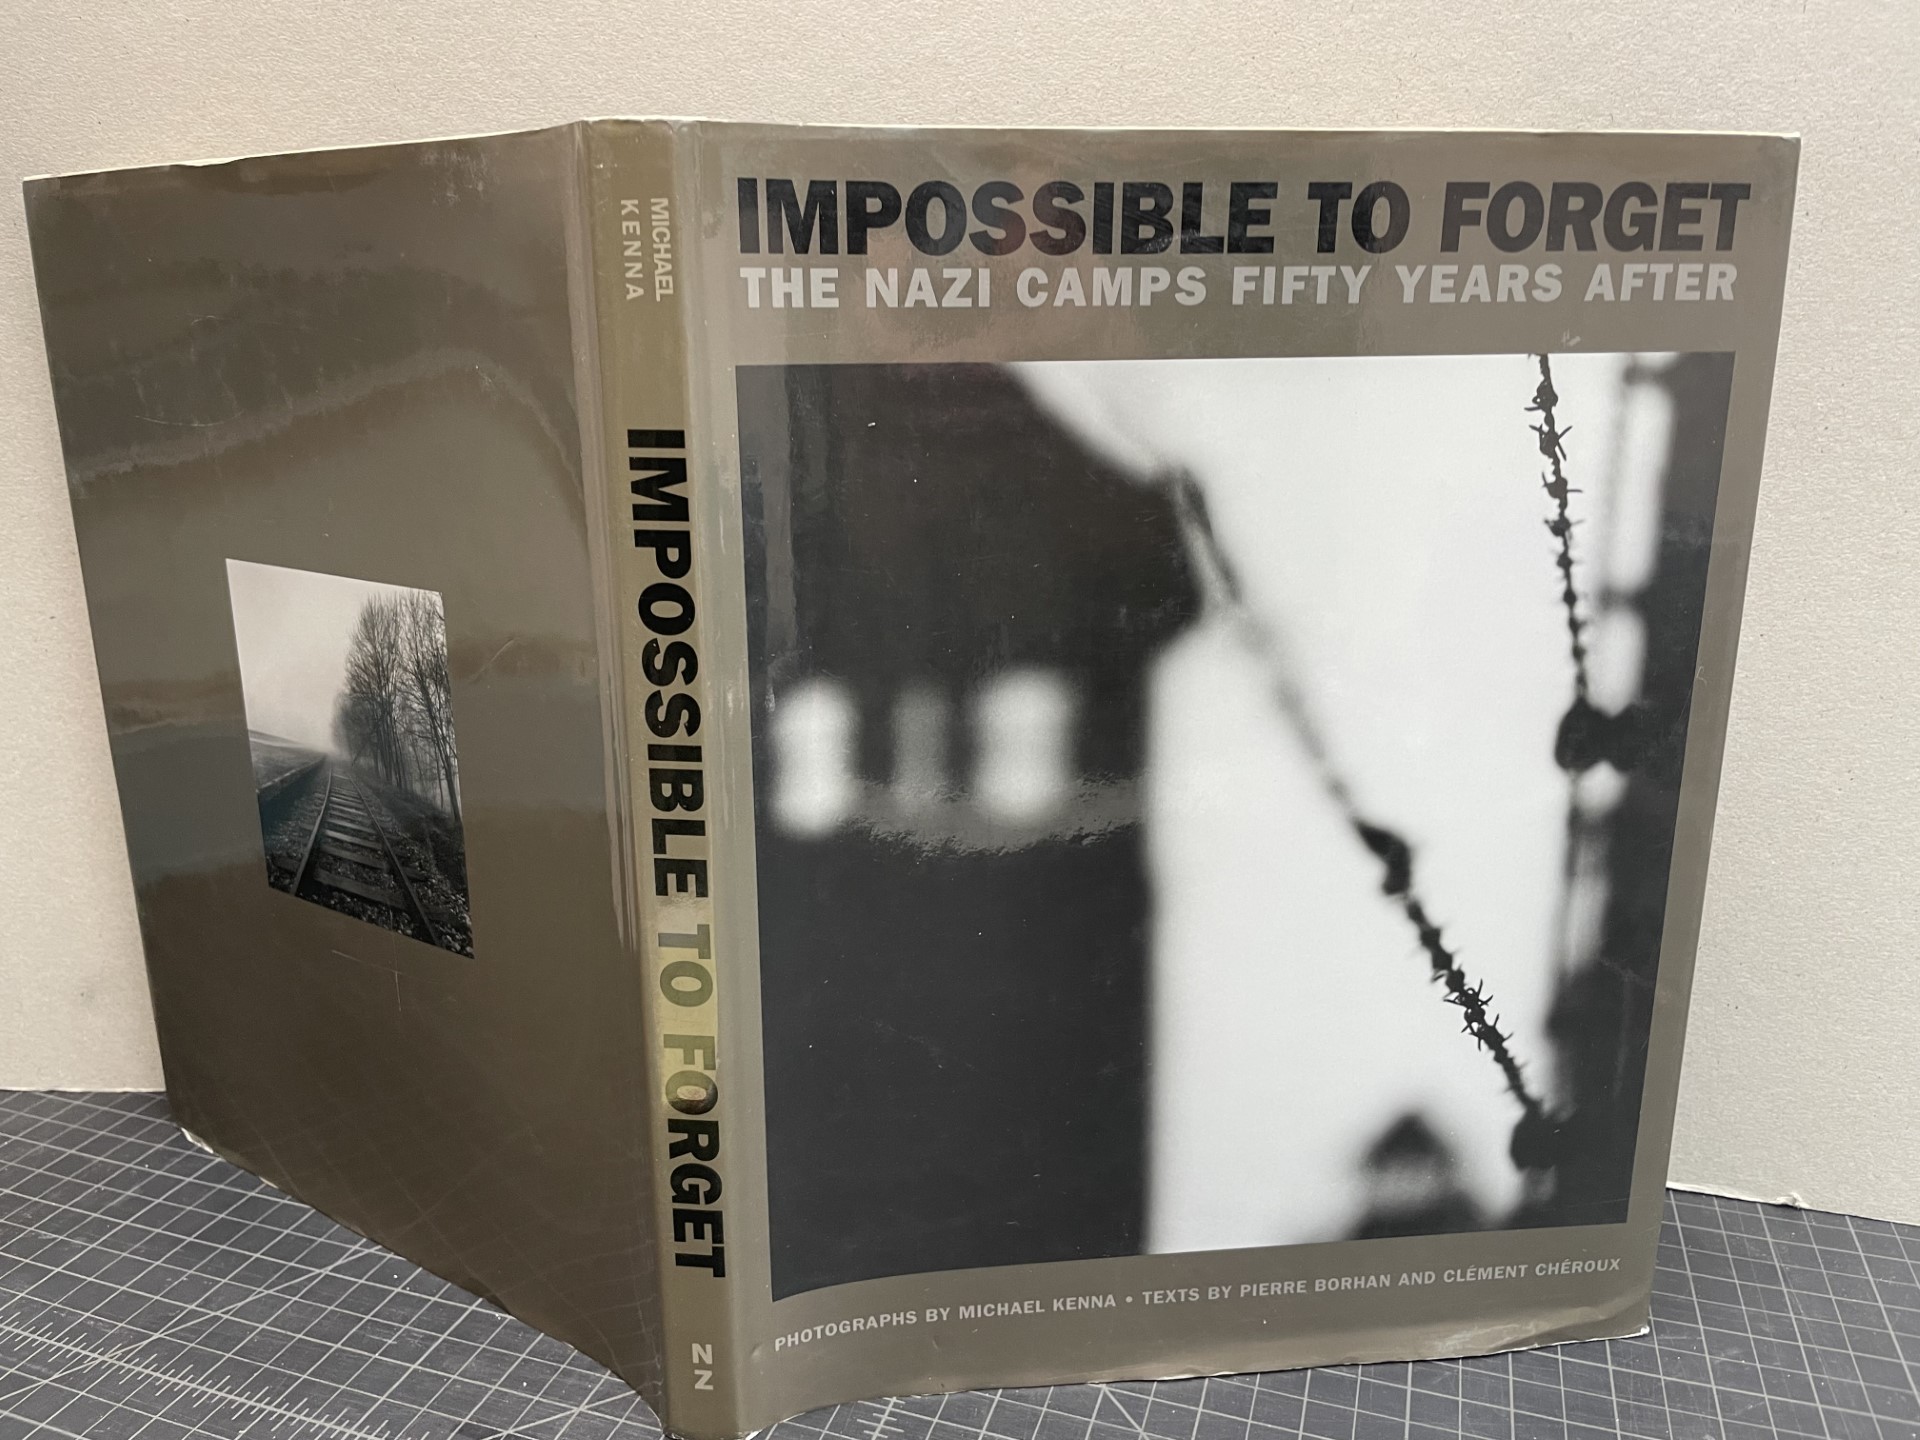 IMPOSSIBLE TO FORGET : The Nazi Camps Fifty Years After ( signed ) - Kenna, Michael ( text by Pierre Borhan & Clement Cheroux )